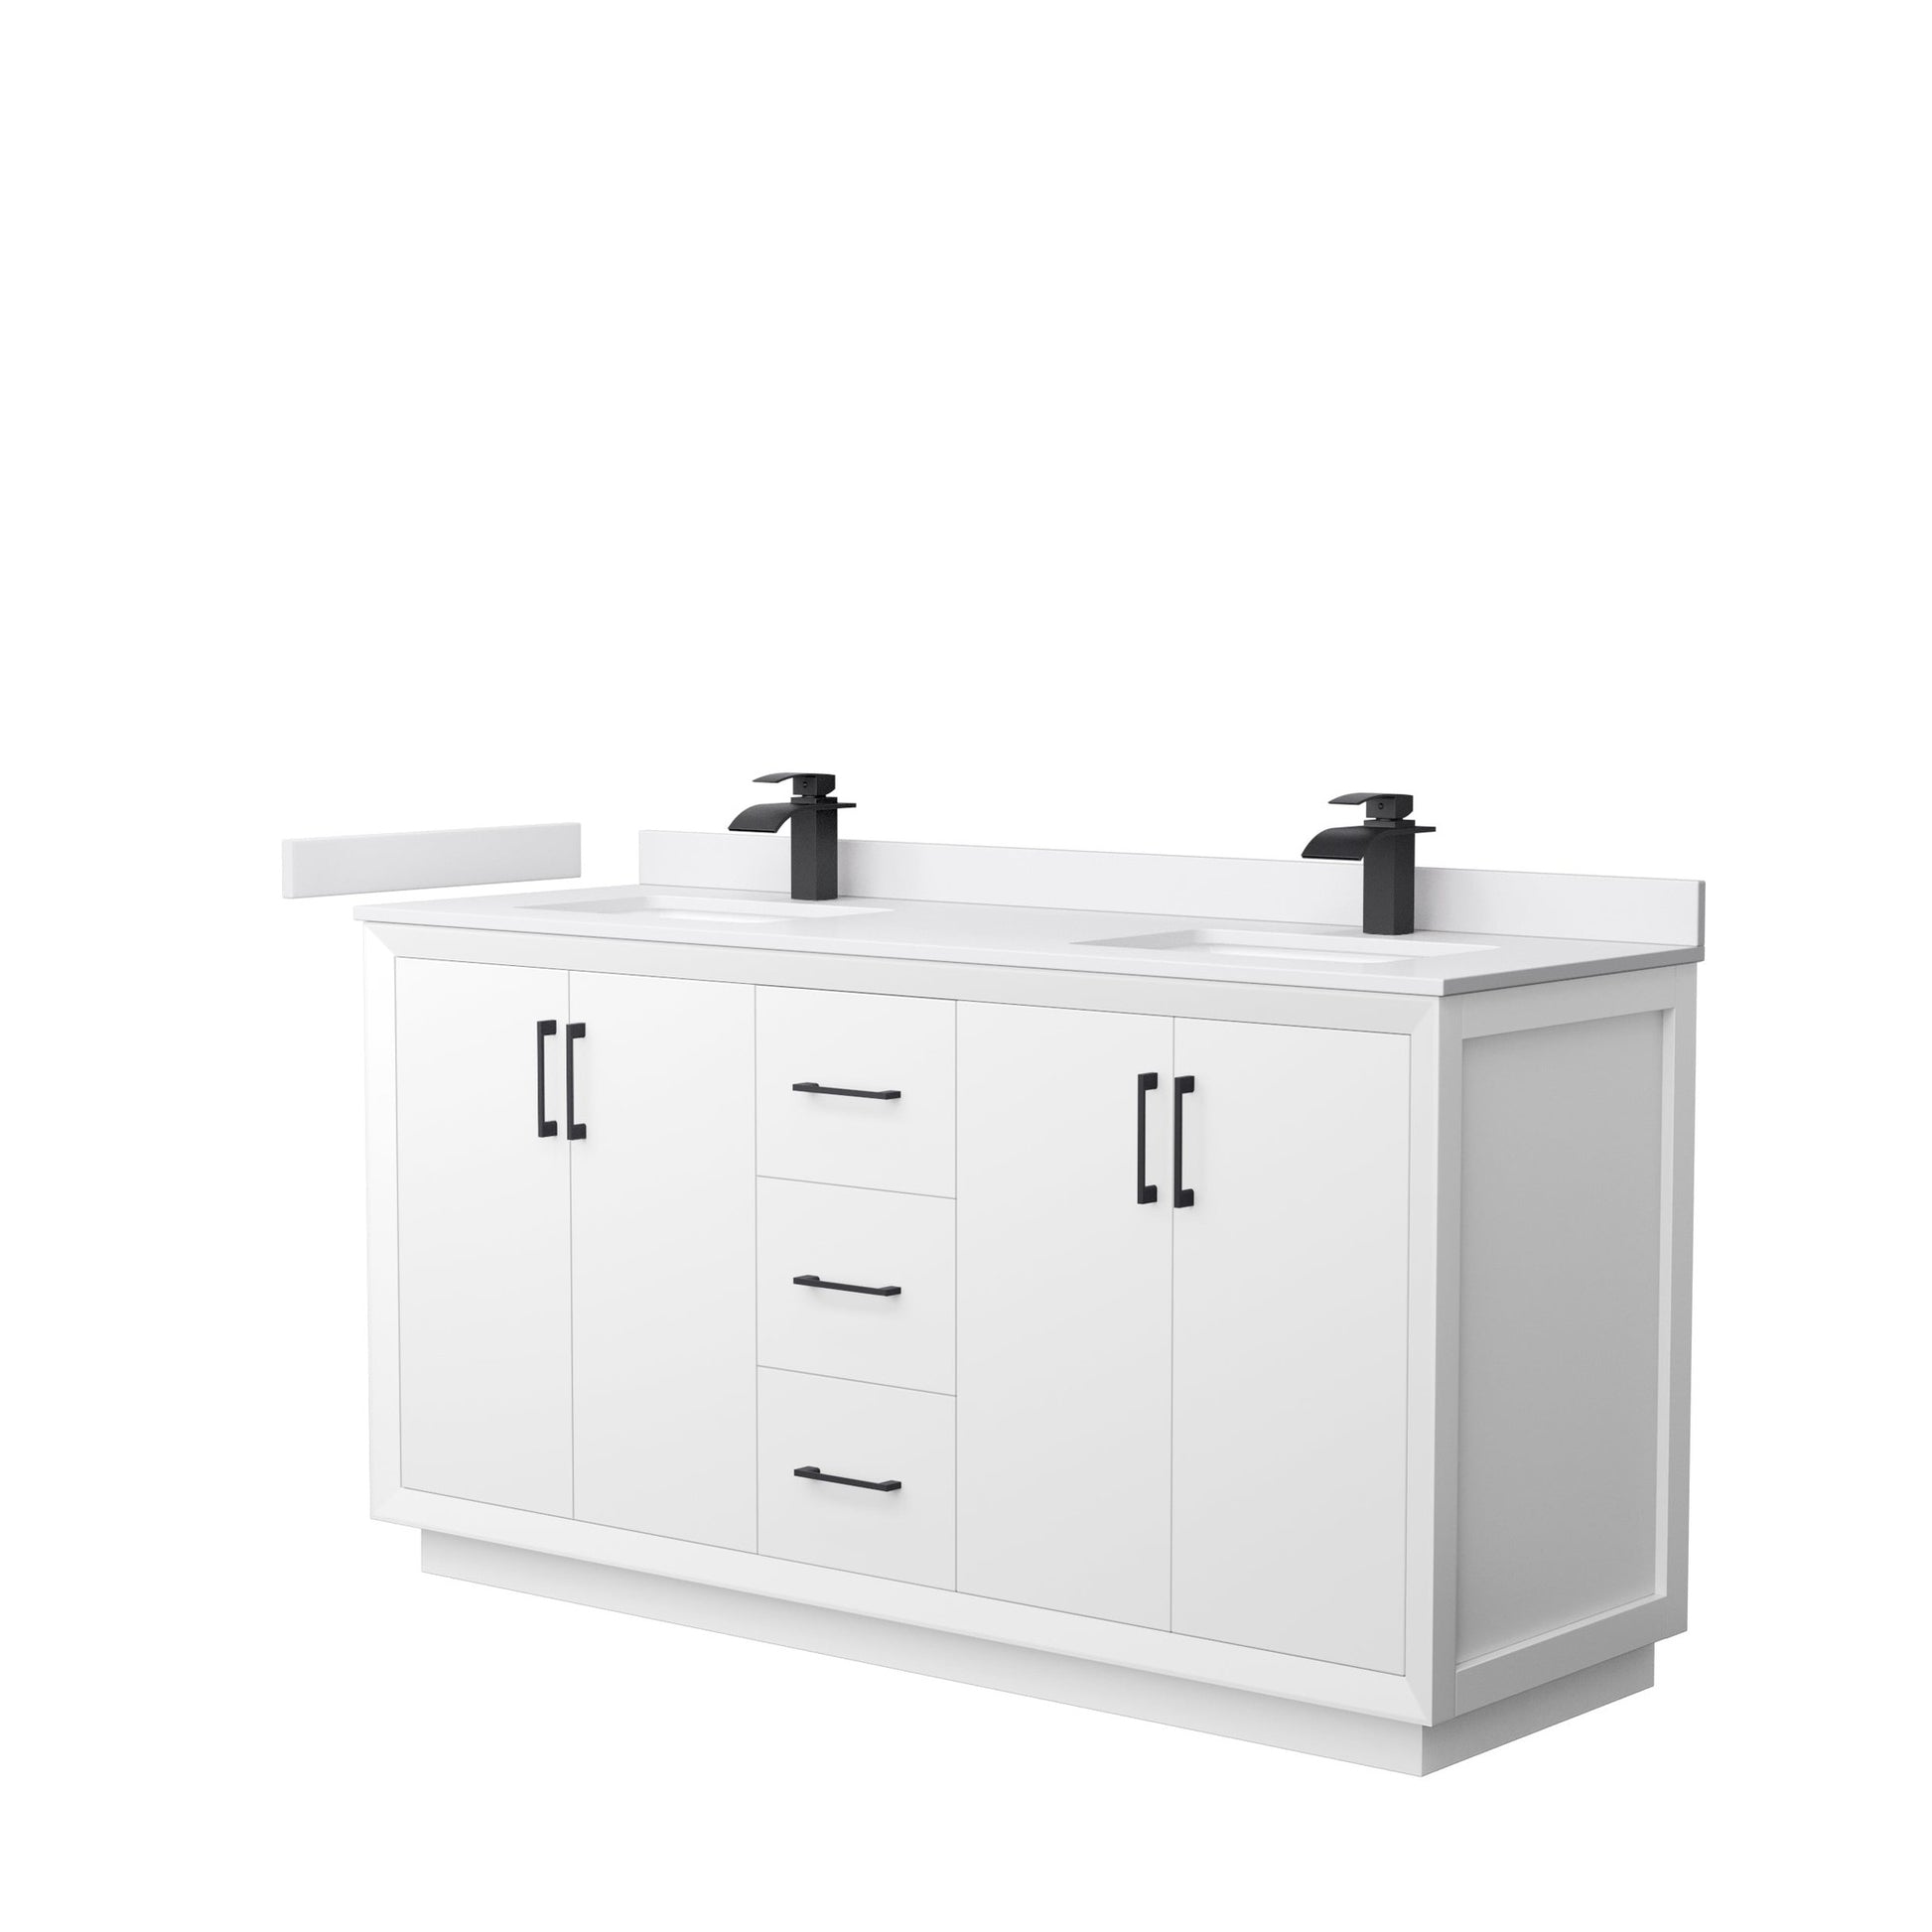 Wyndham Collection Strada 66" Double Bathroom Vanity in White, White Cultured Marble Countertop, Undermount Square Sink, Matte Black Trim